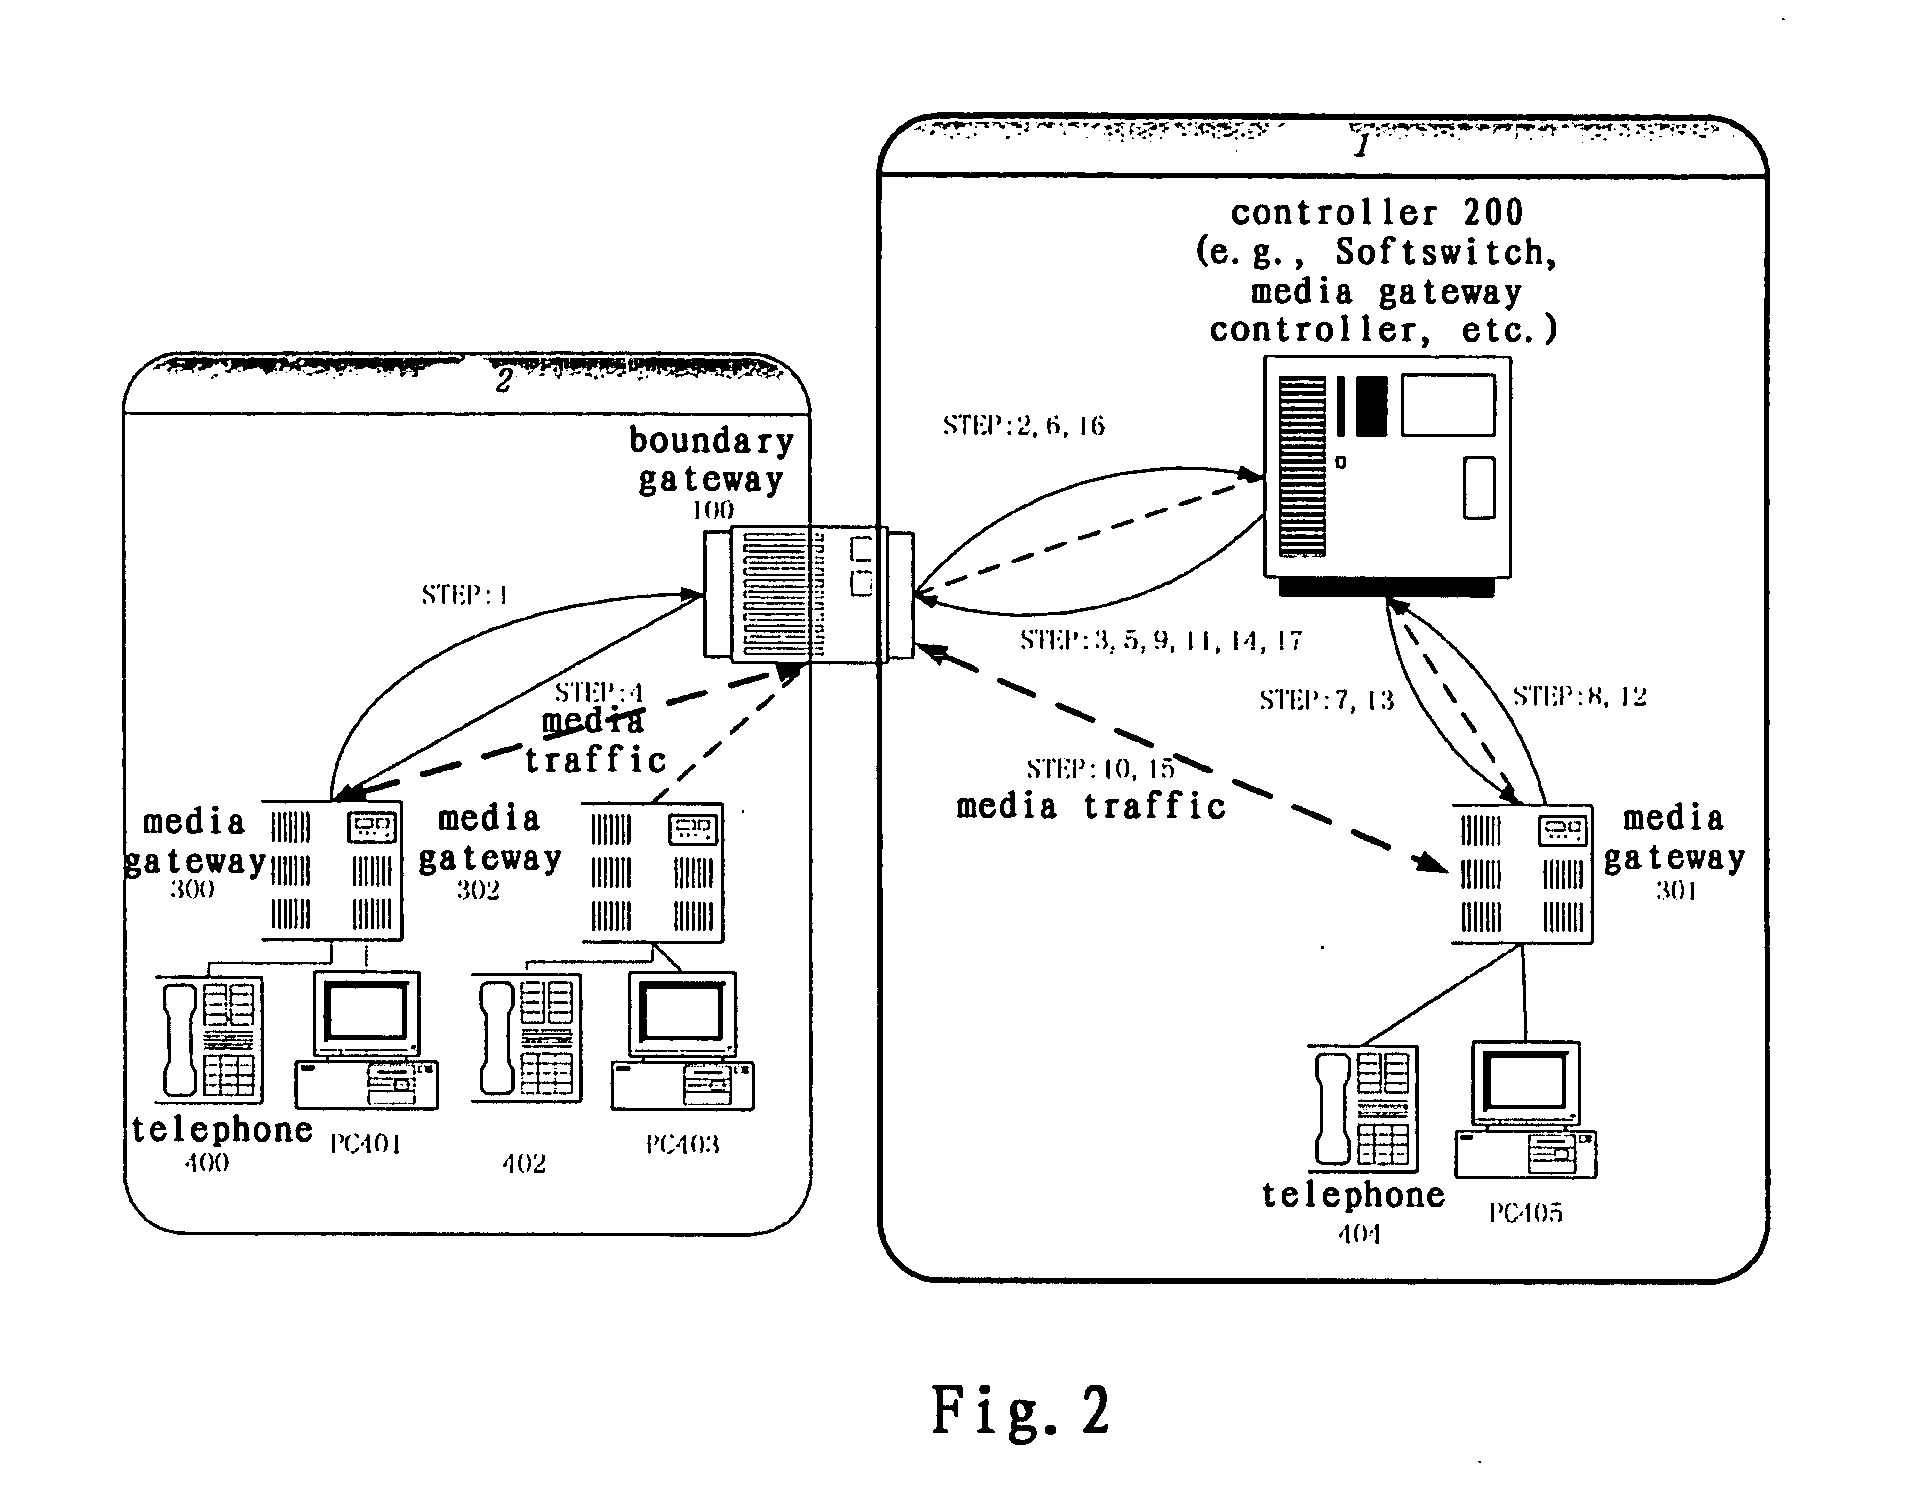 System and method for implementing multimedia calls across a private network boundary